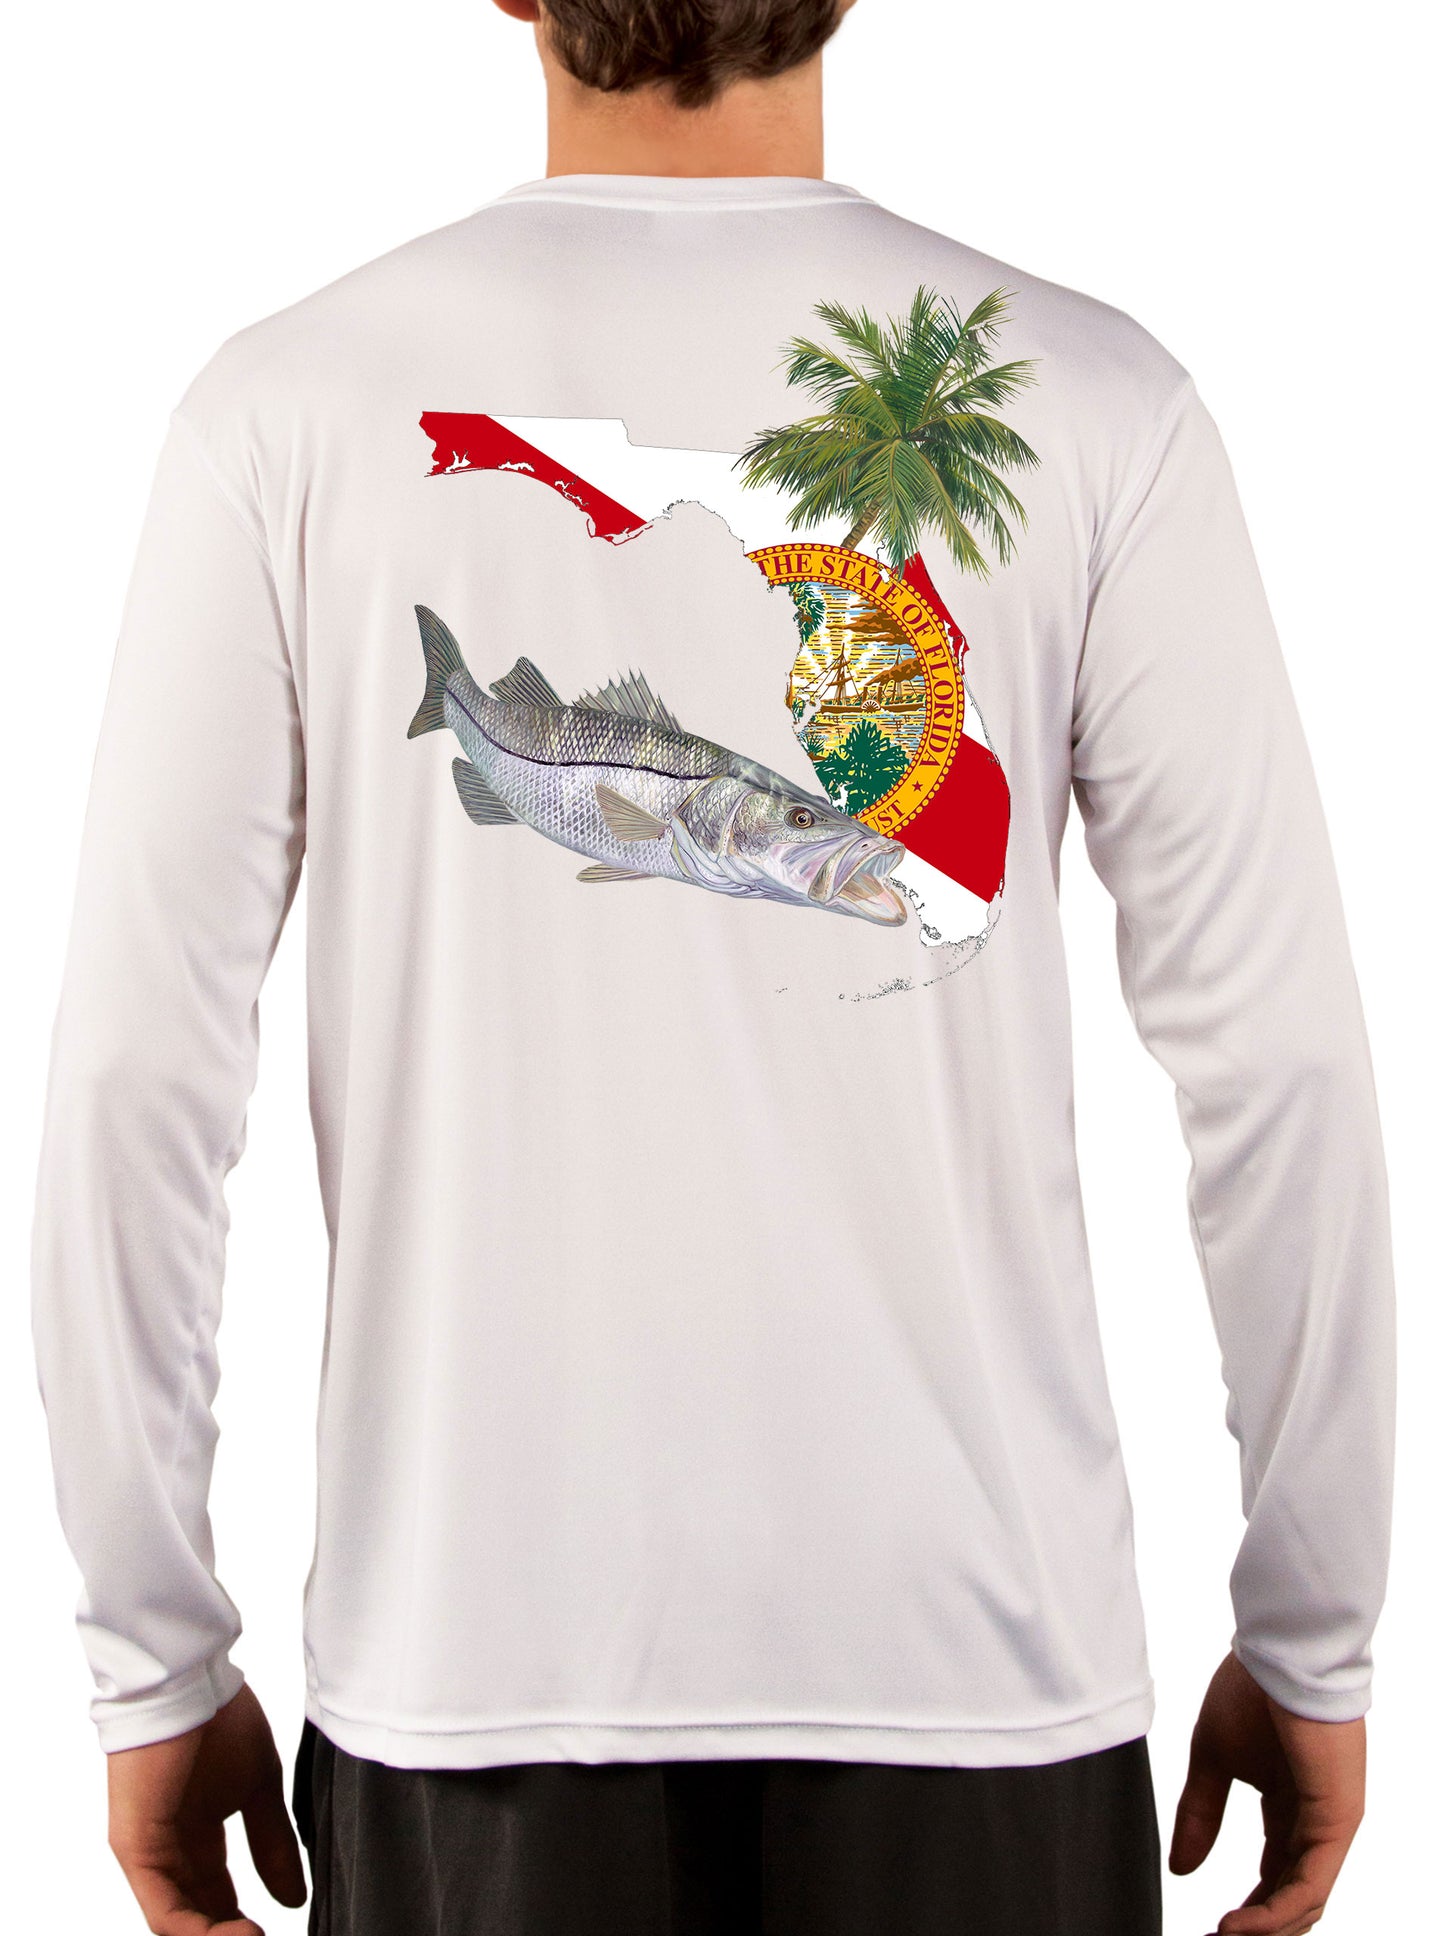 Florida Snook Long Sleeve Mens Fishing Shirt with Florida State Flag Sleeve 3XL / White